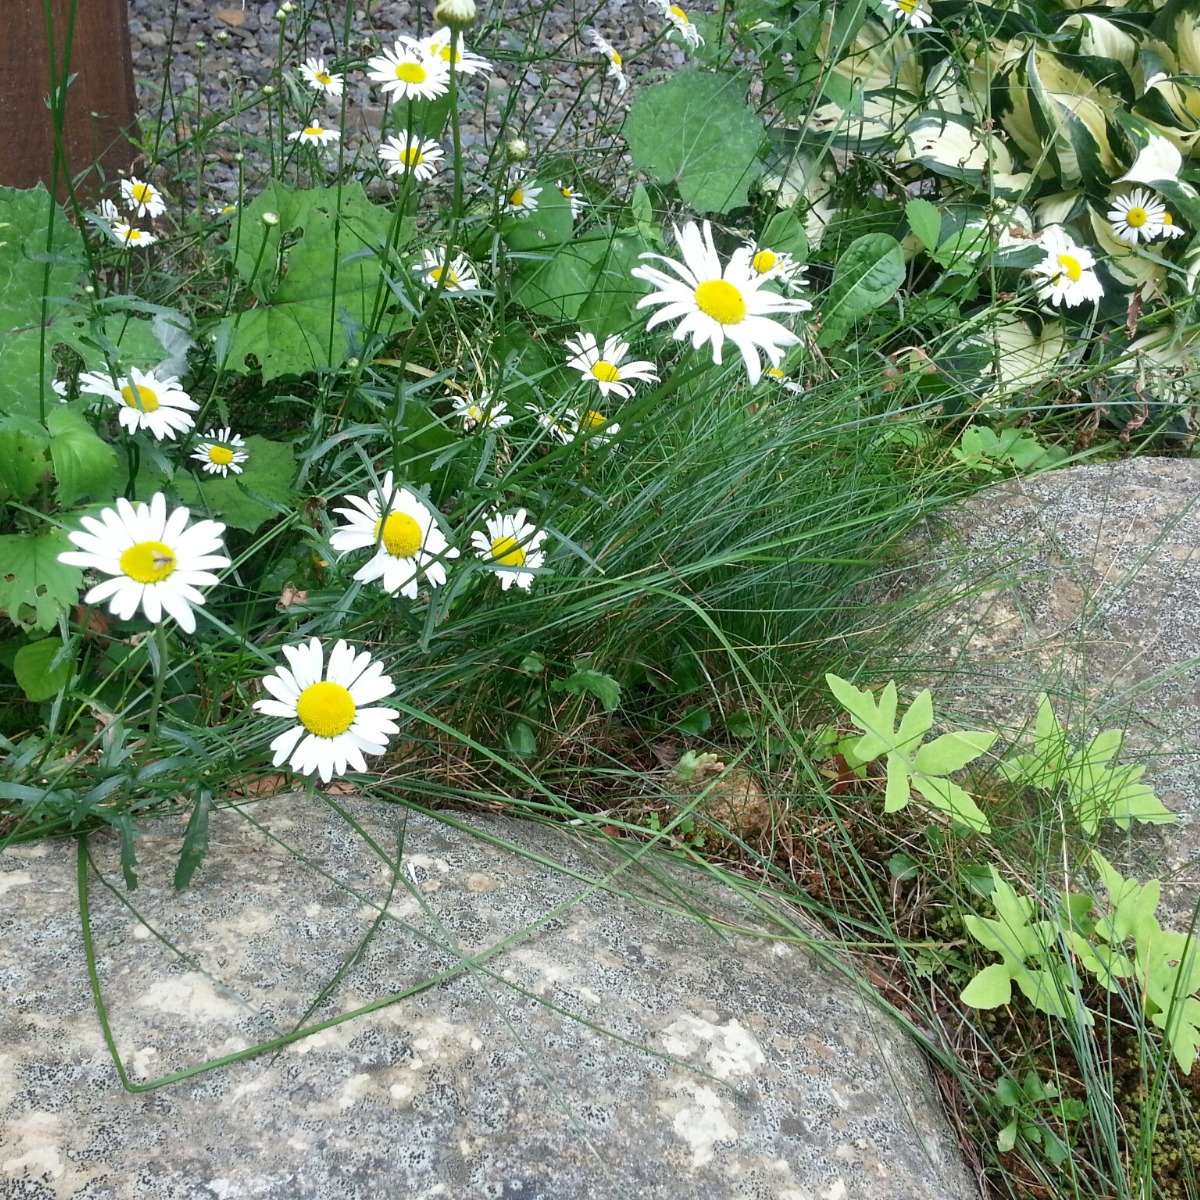 Suspected Oxeye daisies in the Adirondacks of New York